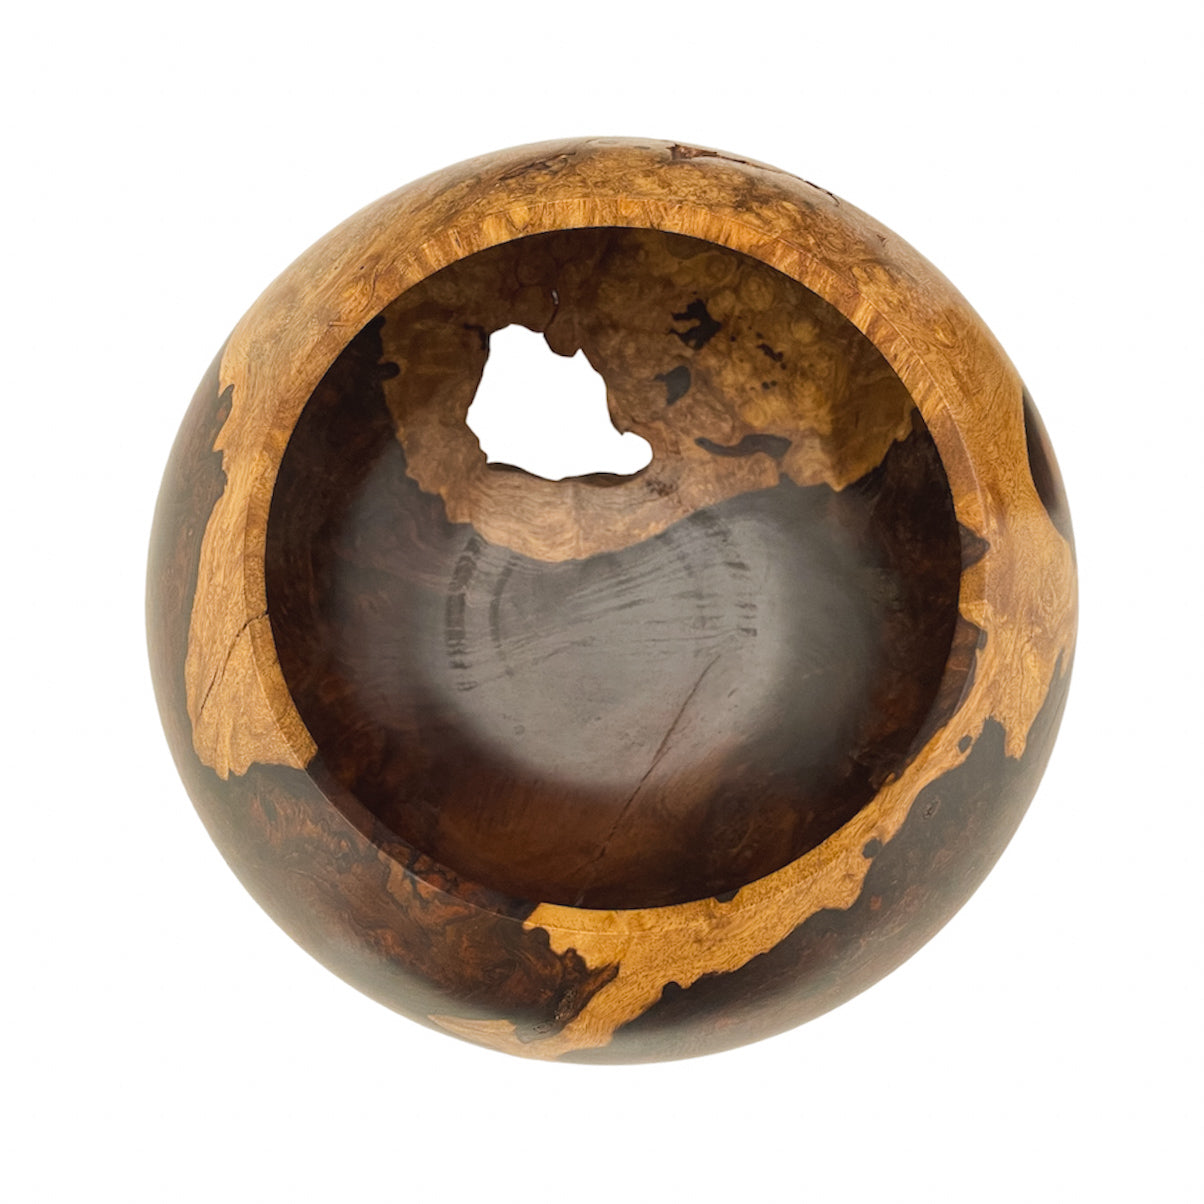 "DEMETER" WOOD BOWL WITH STAND